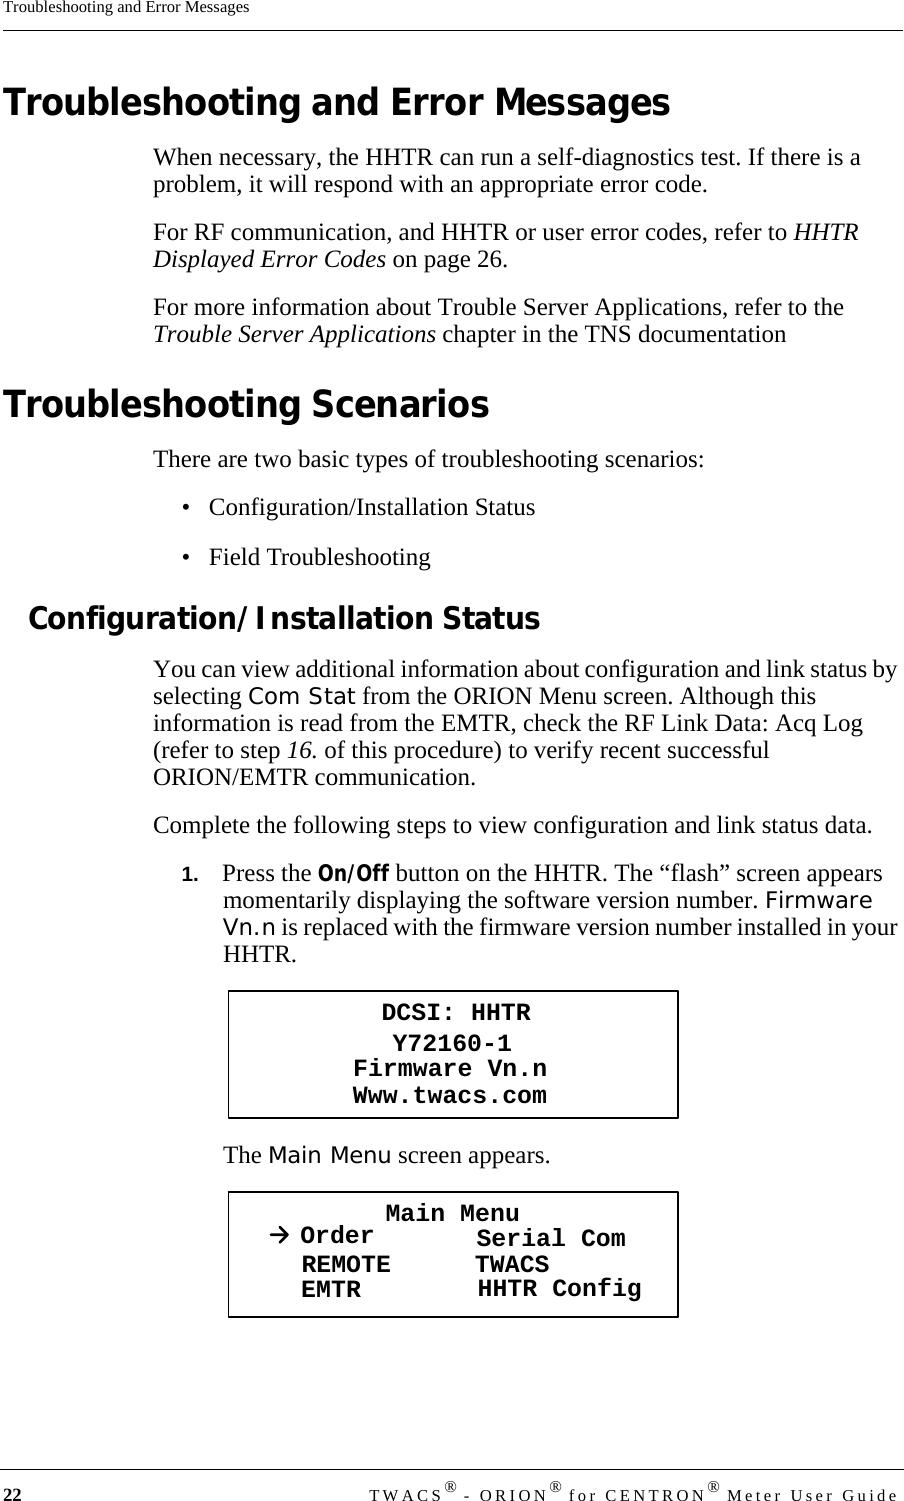 22 TWACS® - ORION® for CENTRON® Meter User GuideTroubleshooting and Error MessagesTroubleshooting and Error MessagesWhen necessary, the HHTR can run a self-diagnostics test. If there is a problem, it will respond with an appropriate error code. For RF communication, and HHTR or user error codes, refer to HHTR Displayed Error Codes on page 26. For more information about Trouble Server Applications, refer to the Trouble Server Applications chapter in the TNS documentationTroubleshooting ScenariosThere are two basic types of troubleshooting scenarios:• Configuration/Installation Status• Field TroubleshootingConfiguration/Installation StatusYou can view additional information about configuration and link status by selecting Com Stat from the ORION Menu screen. Although this information is read from the EMTR, check the RF Link Data: Acq Log (refer to step 16. of this procedure) to verify recent successful ORION/EMTR communication. Complete the following steps to view configuration and link status data.1.   Press the On/Off button on the HHTR. The “flash” screen appears momentarily displaying the software version number. Firmware Vn.n is replaced with the firmware version number installed in your HHTR.The Main Menu screen appears.DCSI: HHTRY72160-1Www.twacs.comFirmware Vn.nMain MenuOrder Serial ComREMOTEEMTR TWACSHHTR Config